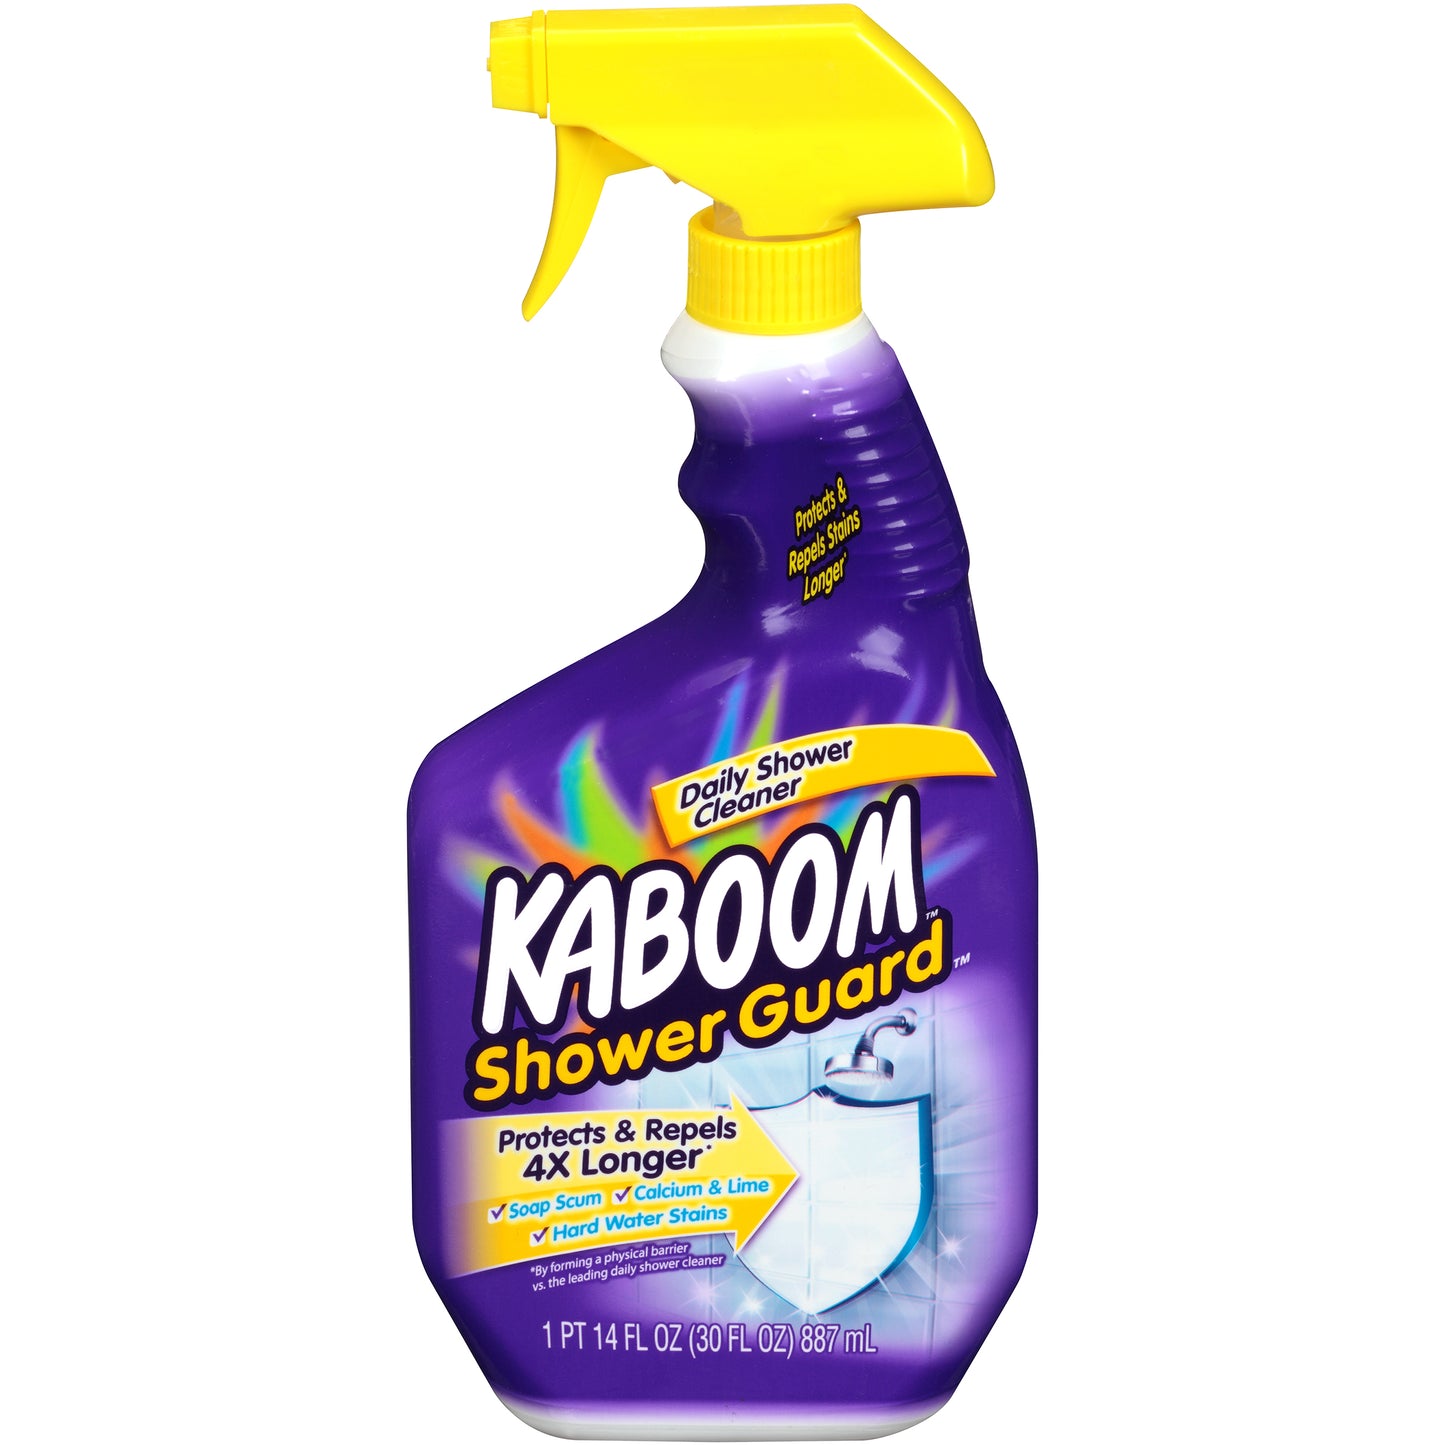 Kaboom Shower Guard Daily Shower Cleaner Spray, Protects & Repels Stains 30 Fl Oz